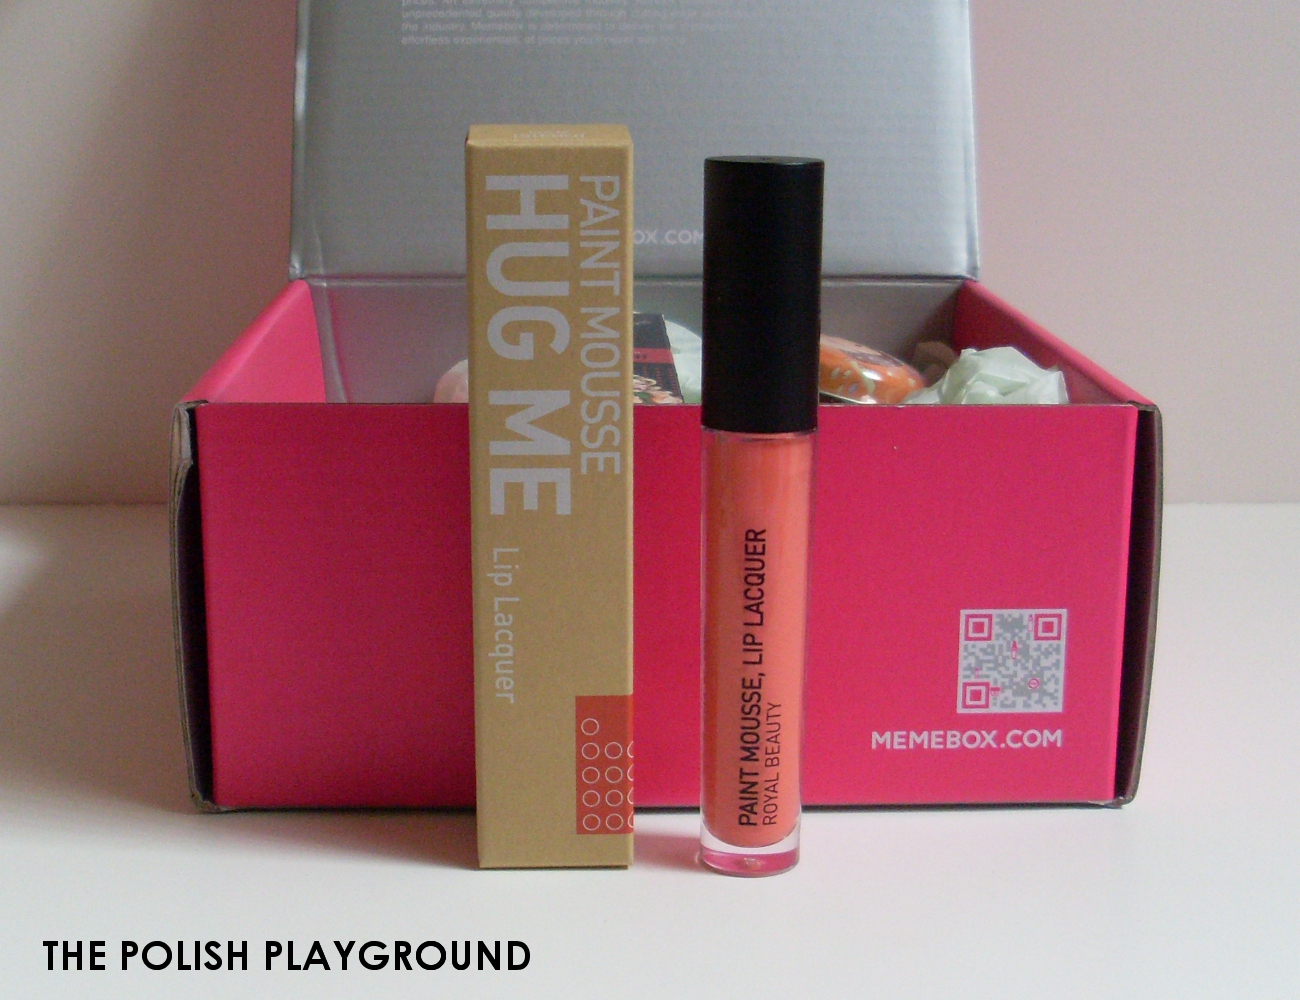 Memebox Superbox #49 All About Lips Unboxing - ROYAL NATURE Paint Mousse Lip Lacquer in 02 OR315 Hug Me